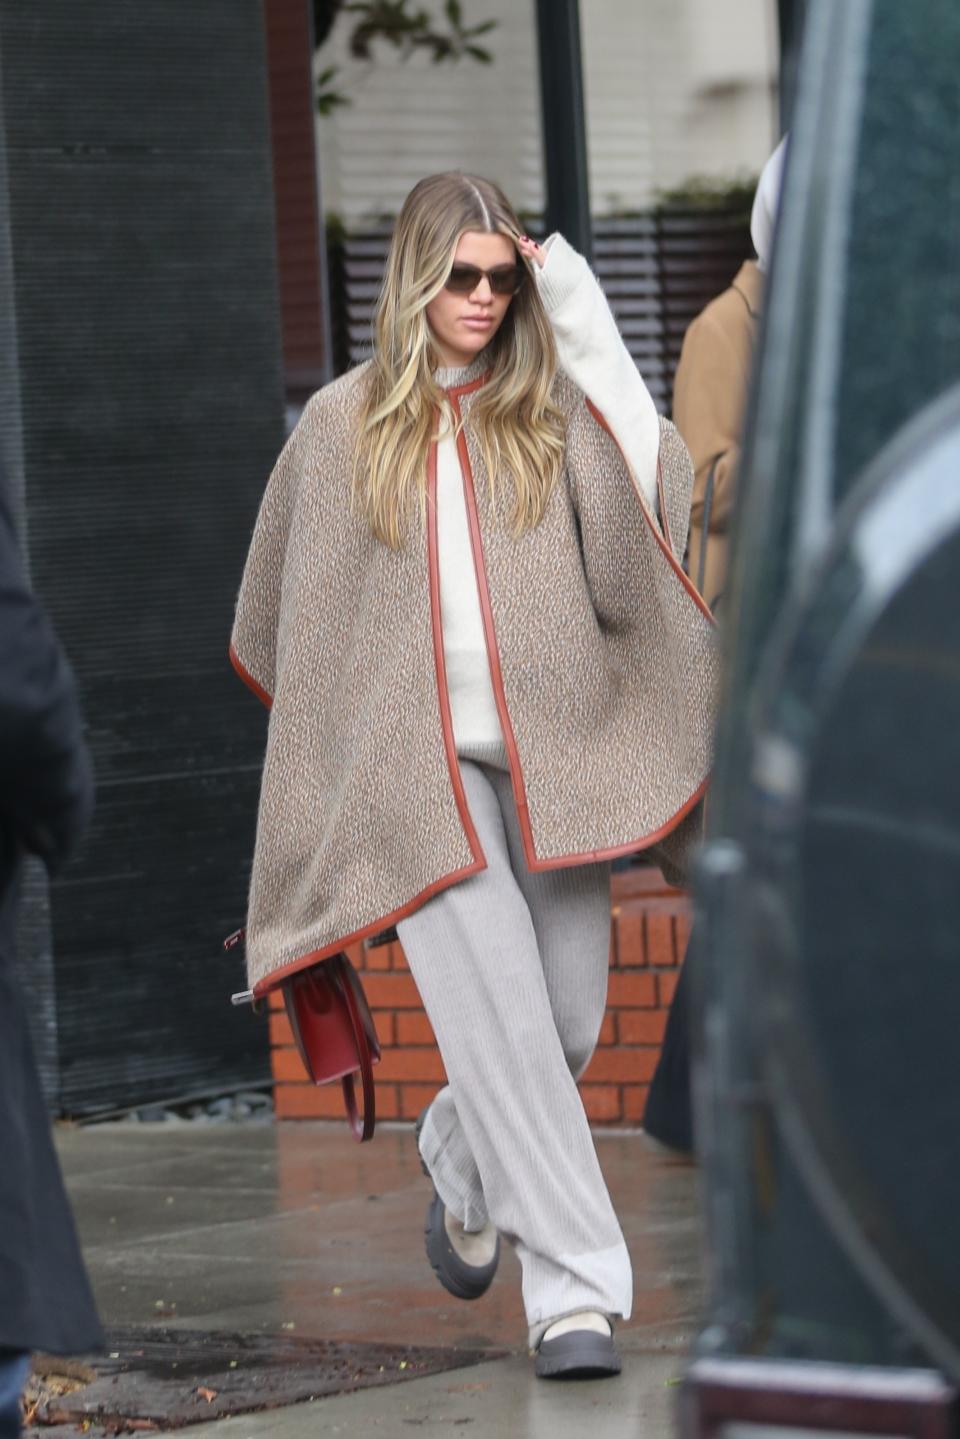 Sofia Richie Grainge wearing a leather-trimmed neutral-toned cape, ribbed knit pants, and rubber boots out on a rainy day